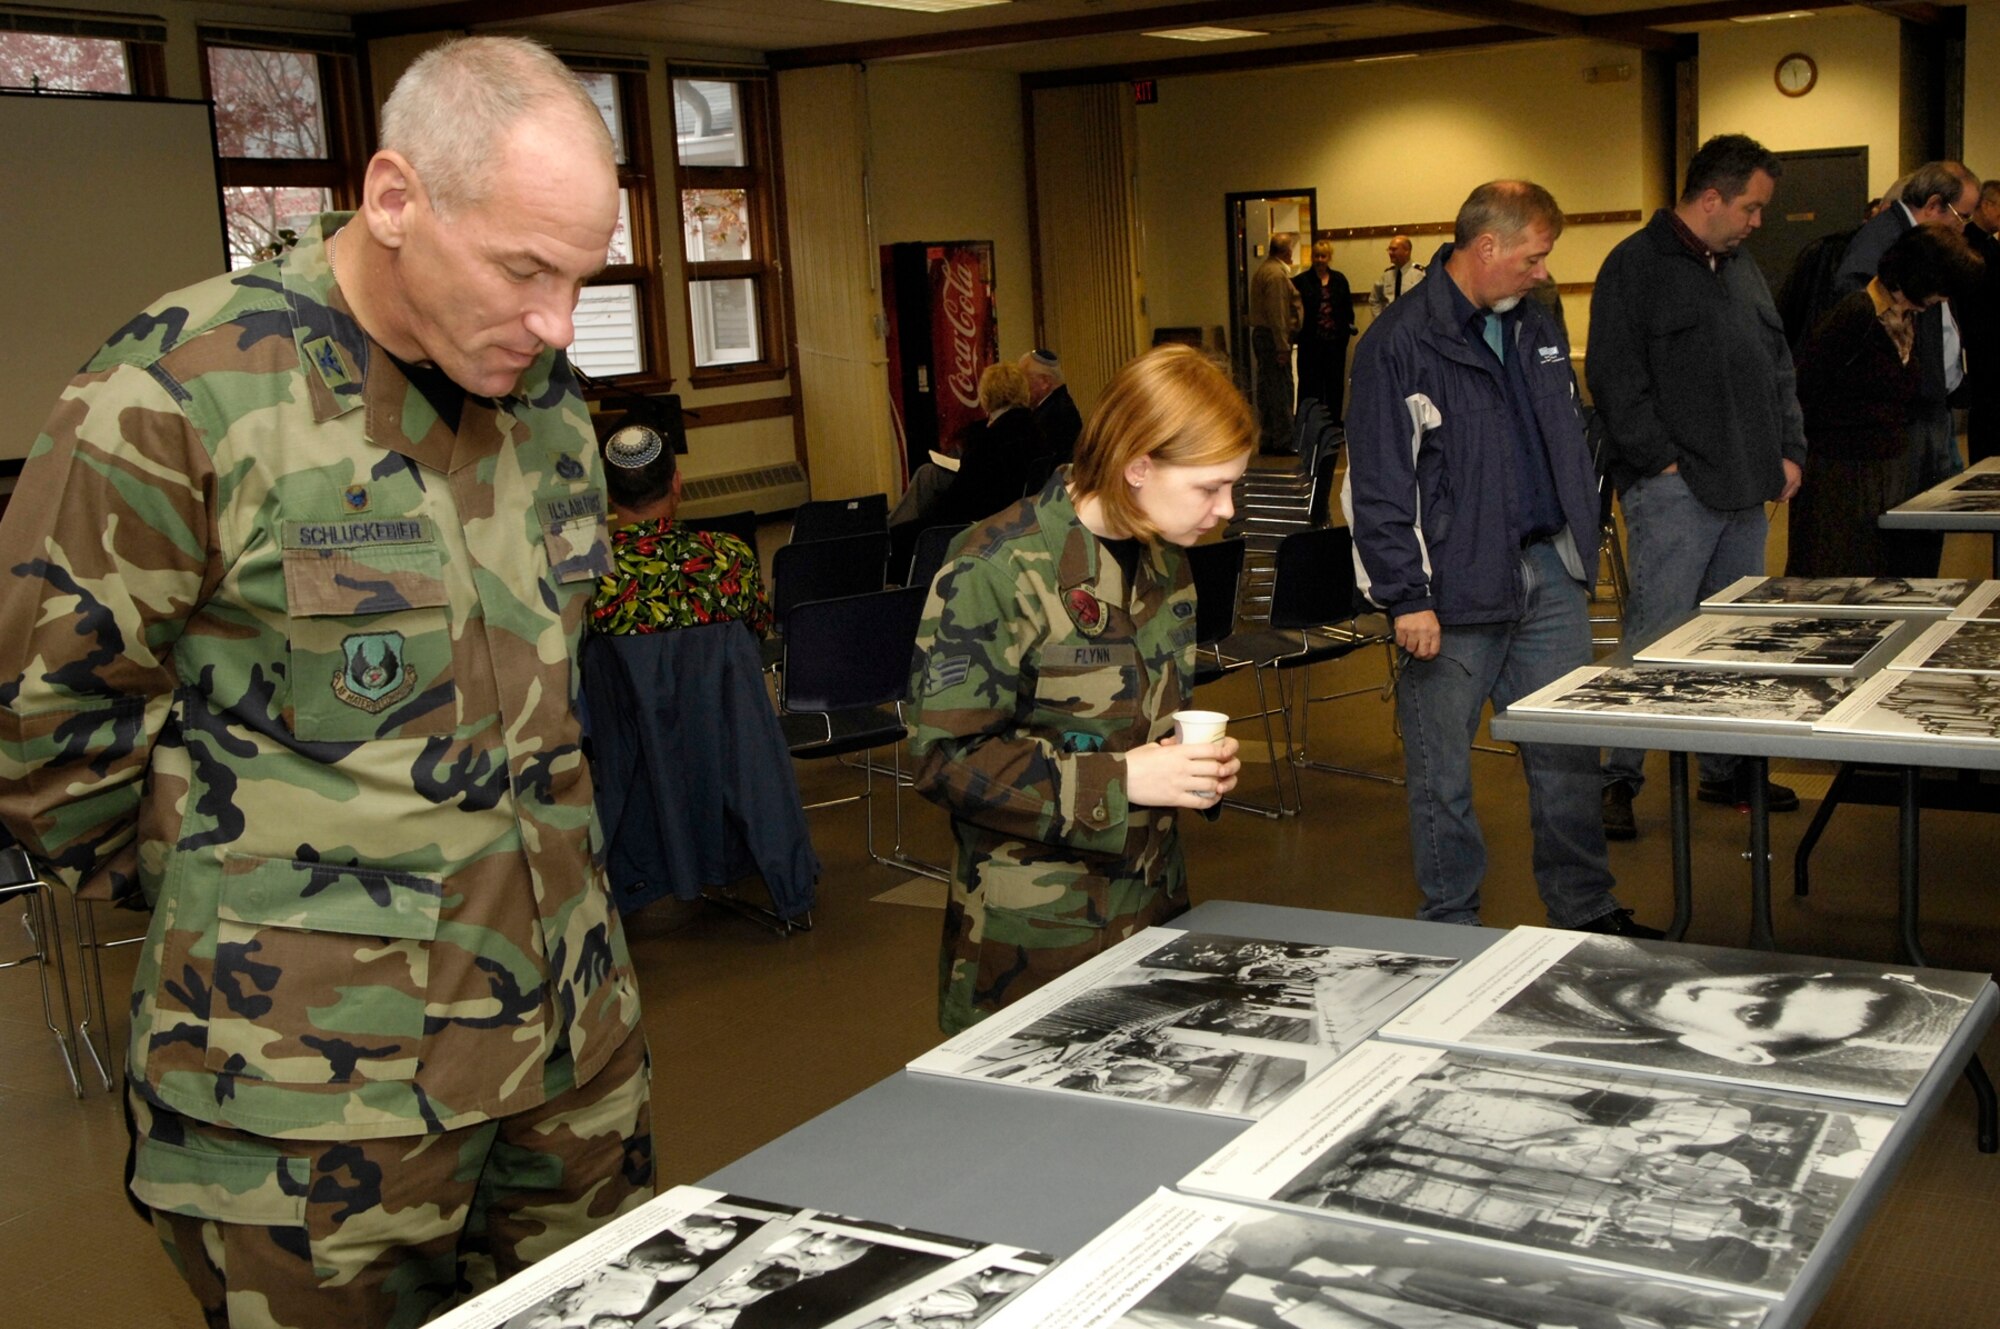 HANSCOM AFB, Mass. -- 66th Air Base Wing Commander Col. Tom Schluckebier (left), Senior Airman Danielle Flynn, Air Force Band of Liberty, and other members of the Hanscom community view Holocaust photo displays at the Base Chapel.  The displays were part of the Holocaust Remembrance Day ceremony, held May 2. (U.S. Air Force photo by Mark Wyatt)